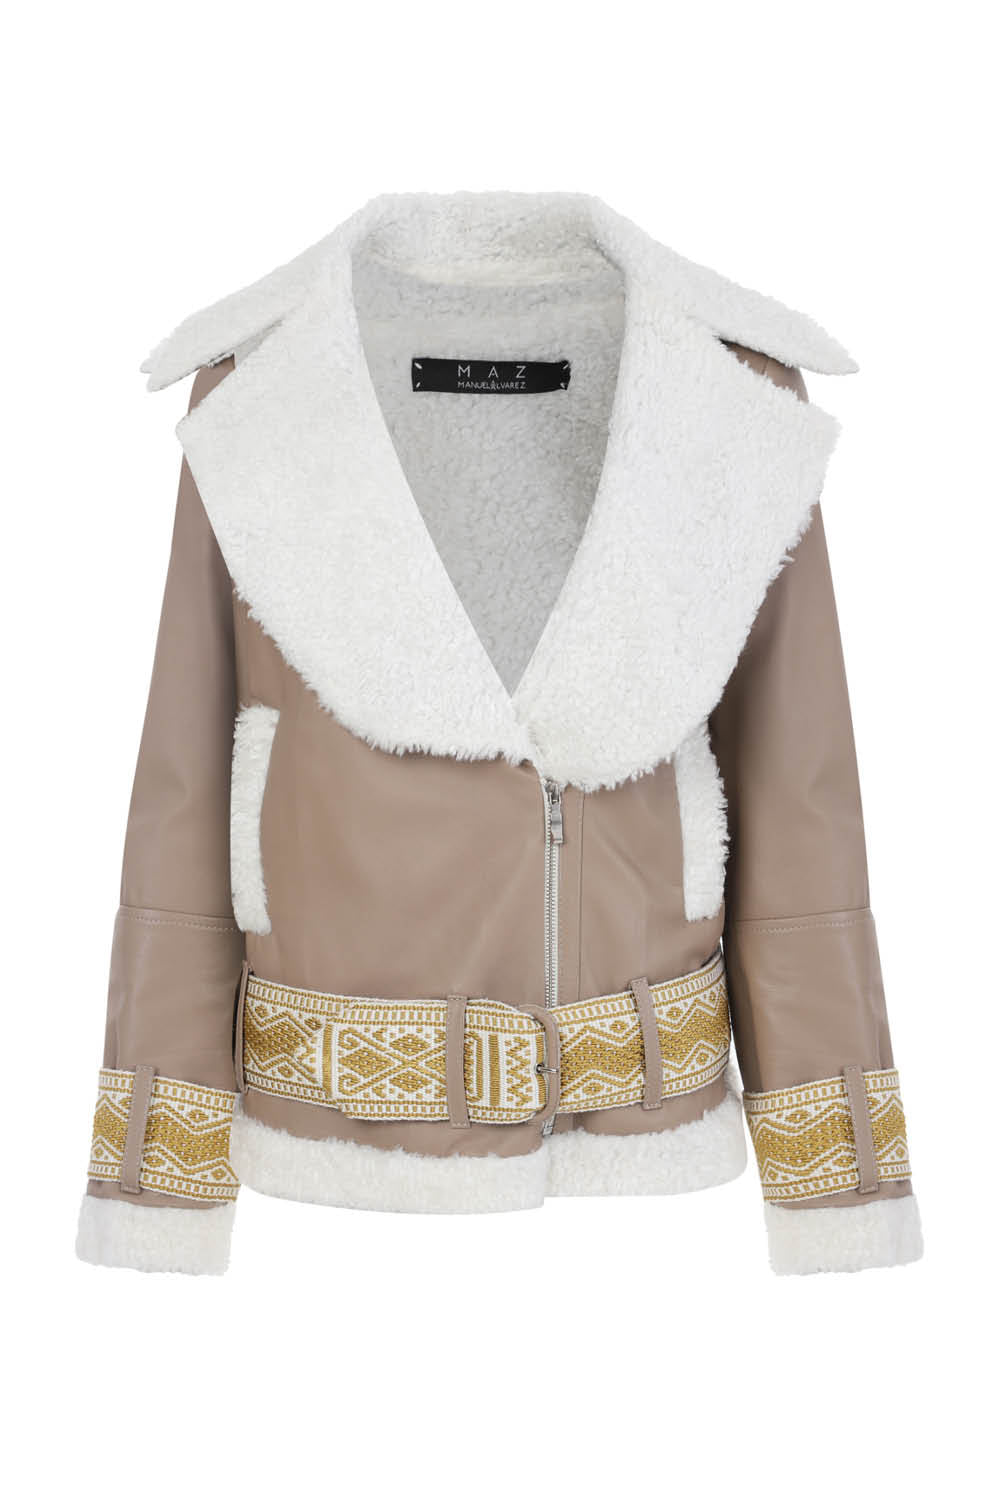 LEATHER CHUMBE JACKET IN SAND / IVORY GOLD HANDCUFFS AND BELT